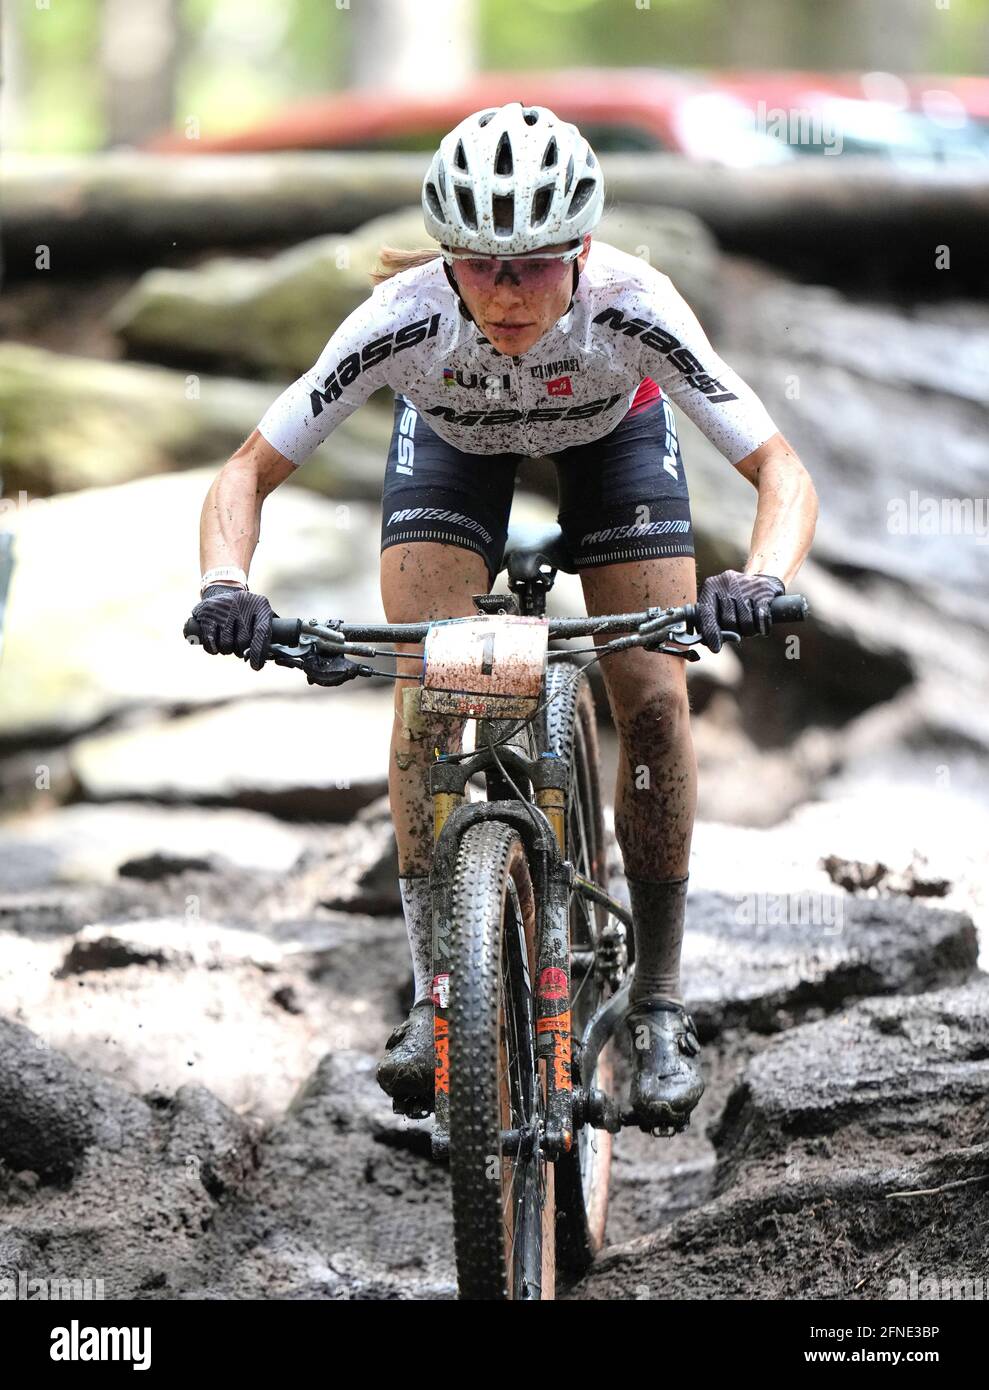 Loana Lecomte (FRA) winner during UCI Mountain Bike World Cup on May, 16  2021, in Nove Mesto Na Morave in Czech Republic Credit: SCS/Soenar  Chamid/AFLO/Alamy Live News Stock Photo - Alamy